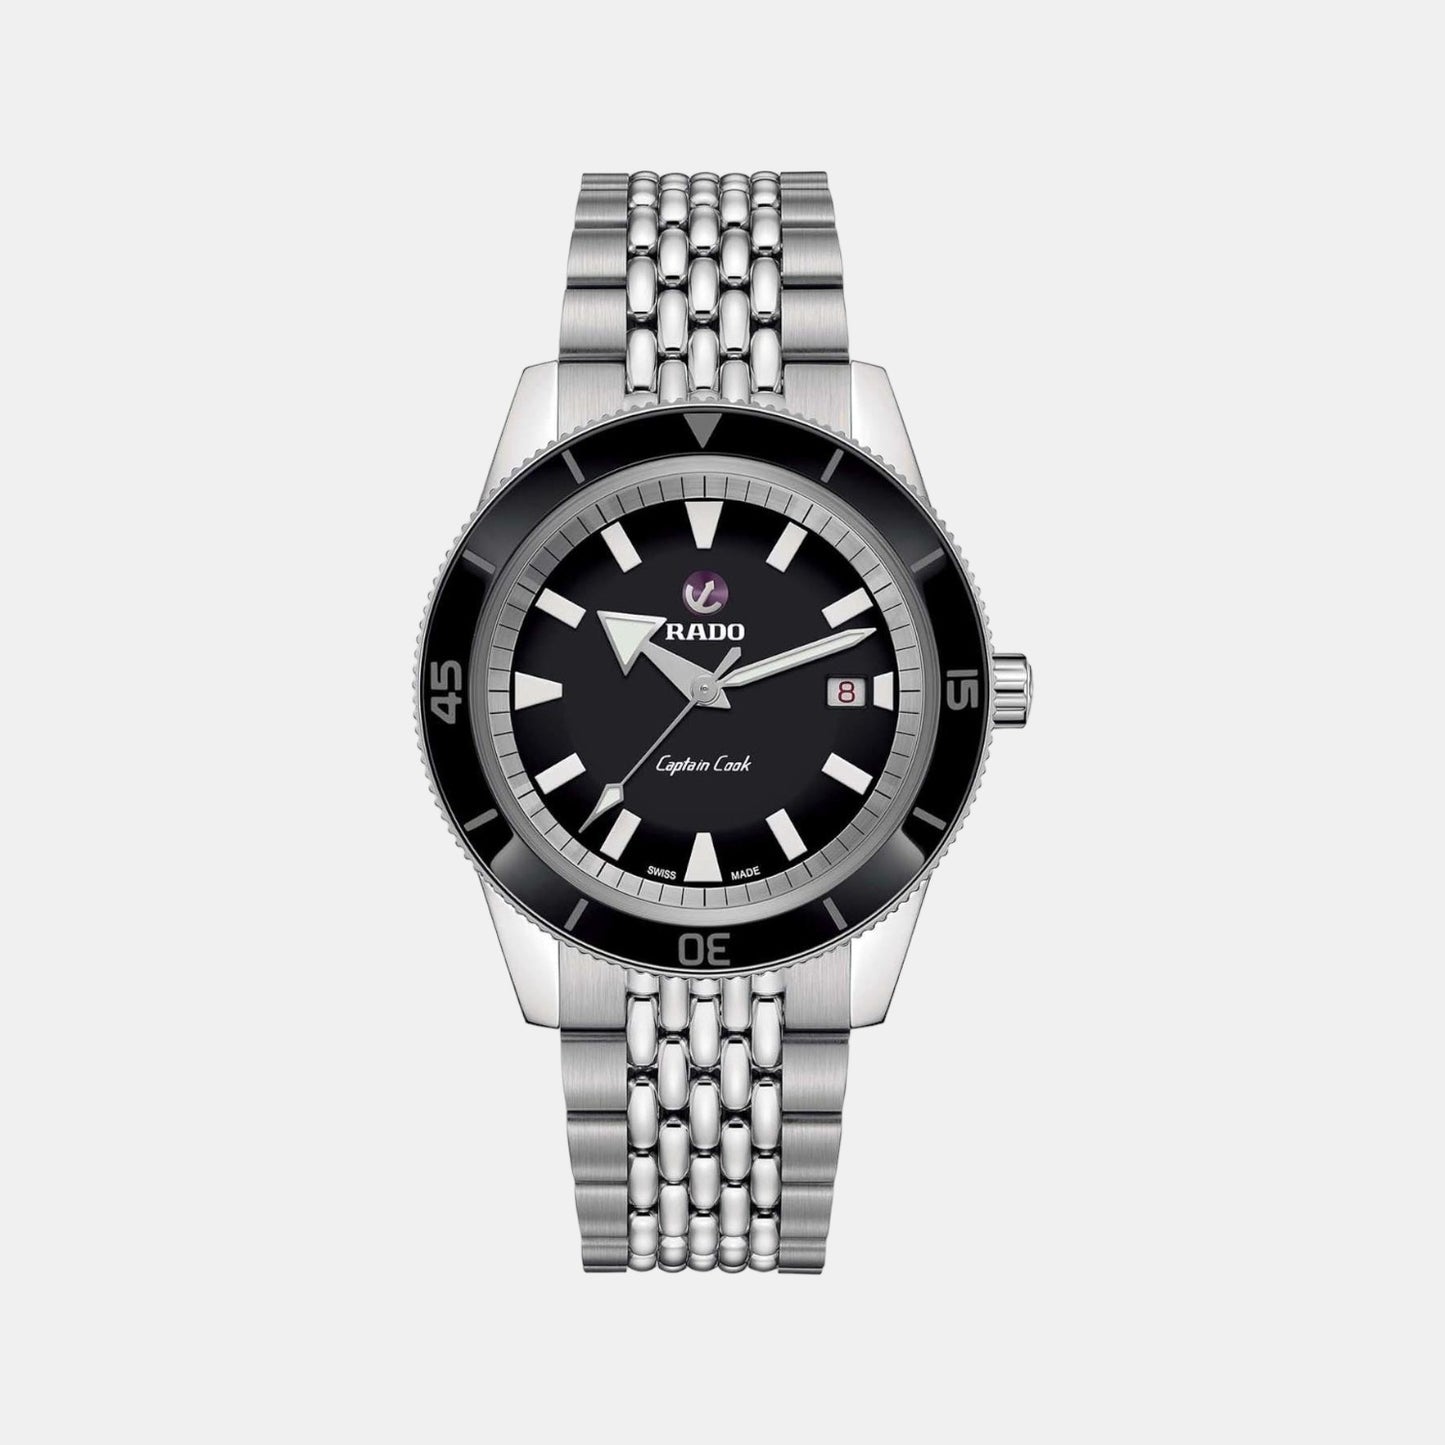 Captain Cook Male Analog Stainless Steel Automatic Watch R32505153